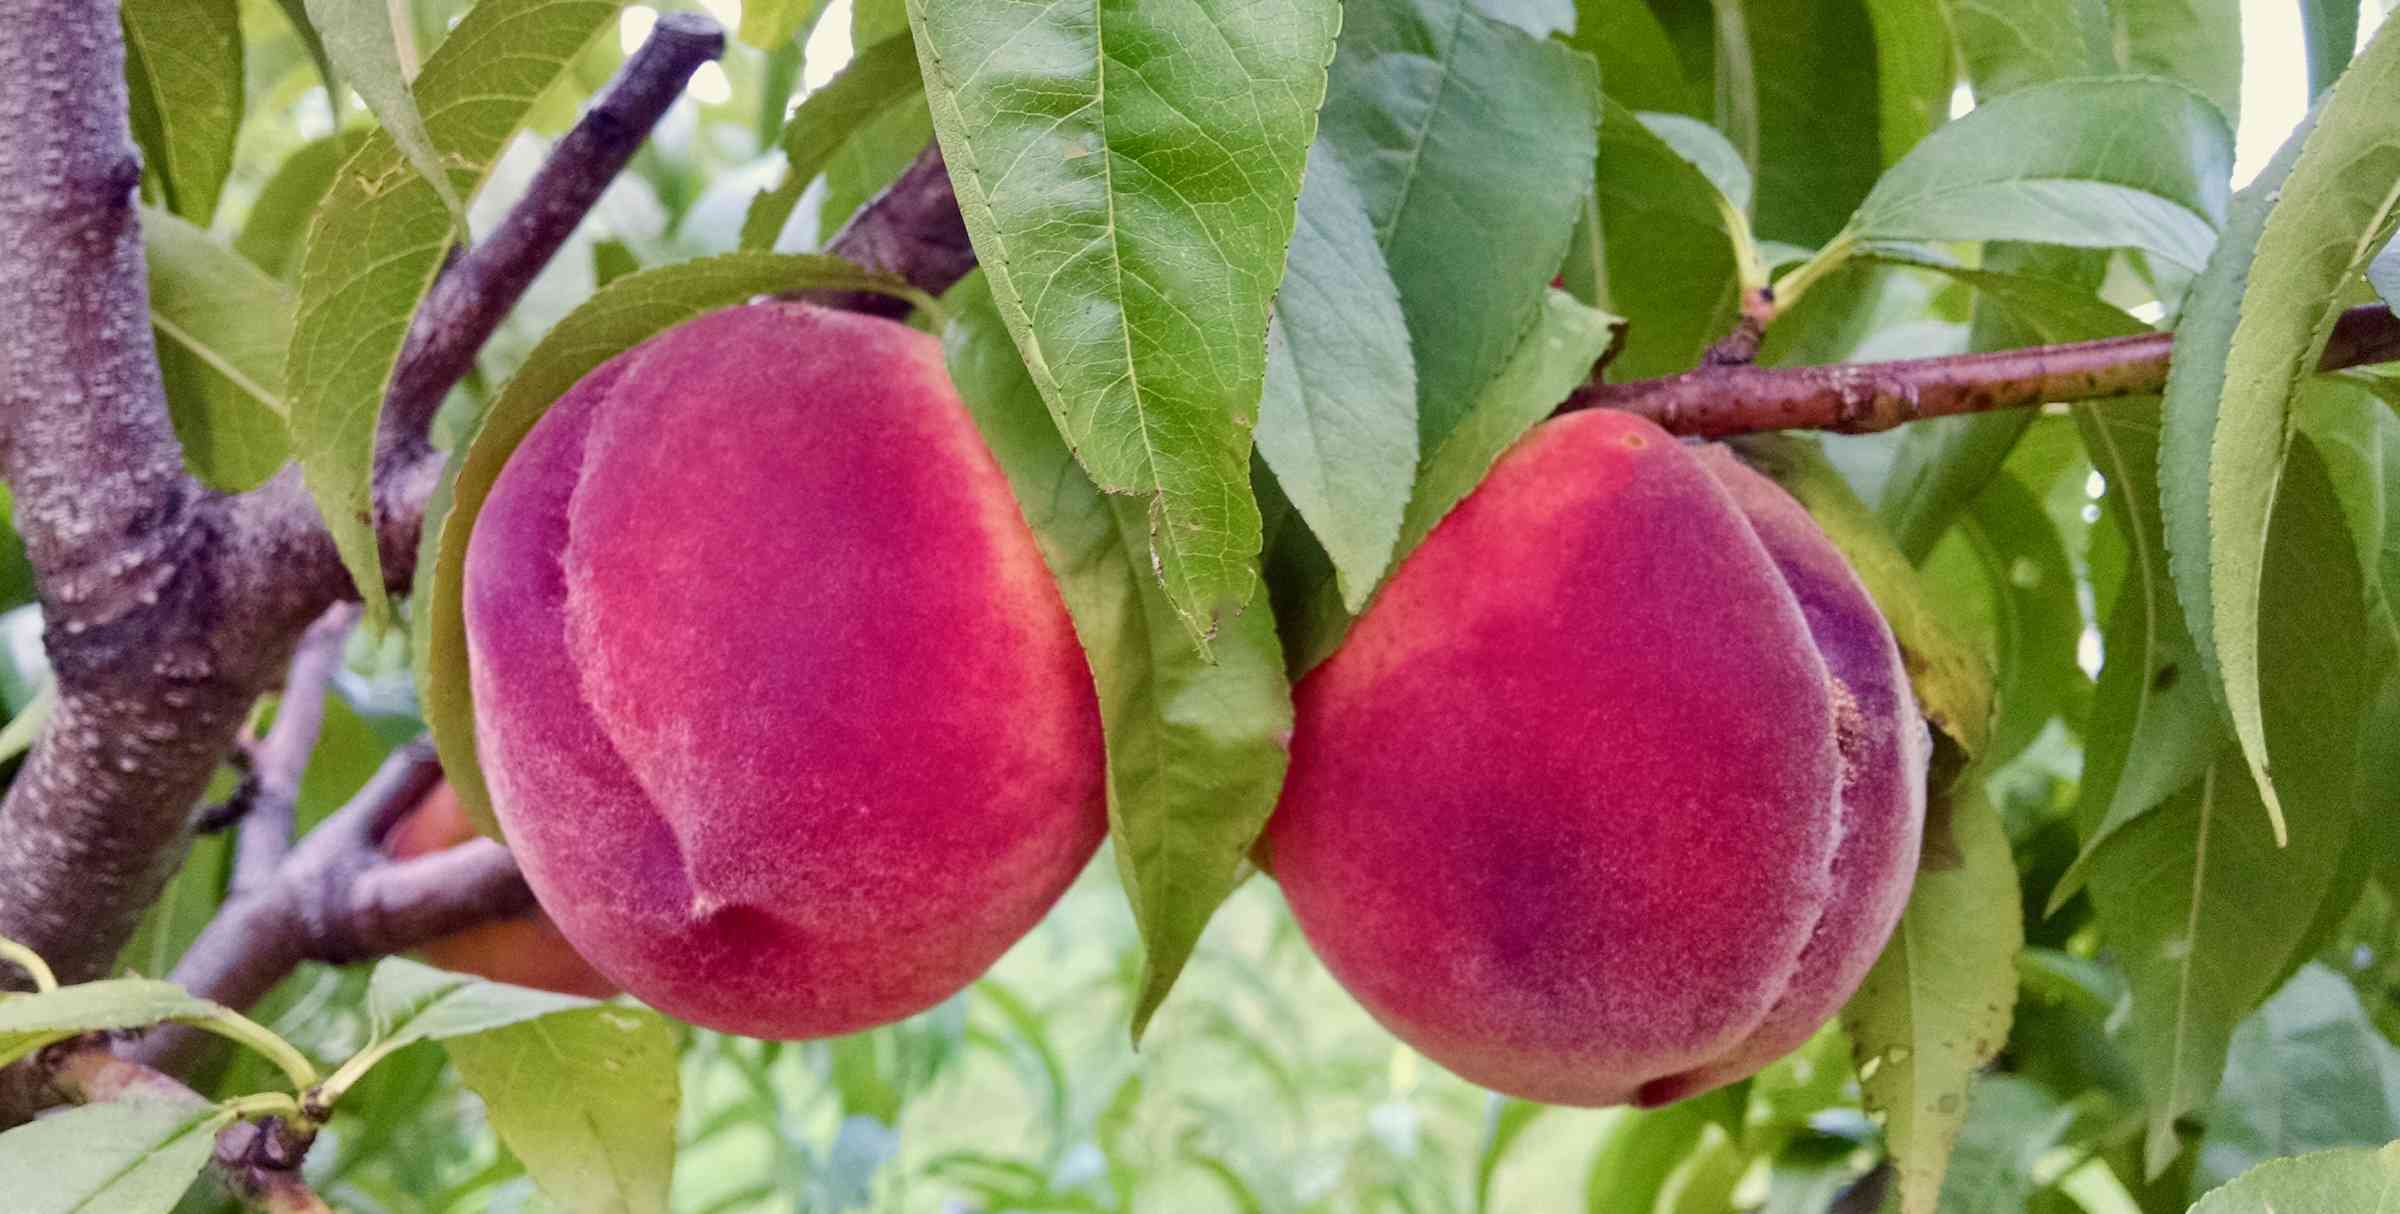 Peaches almost ready to pick